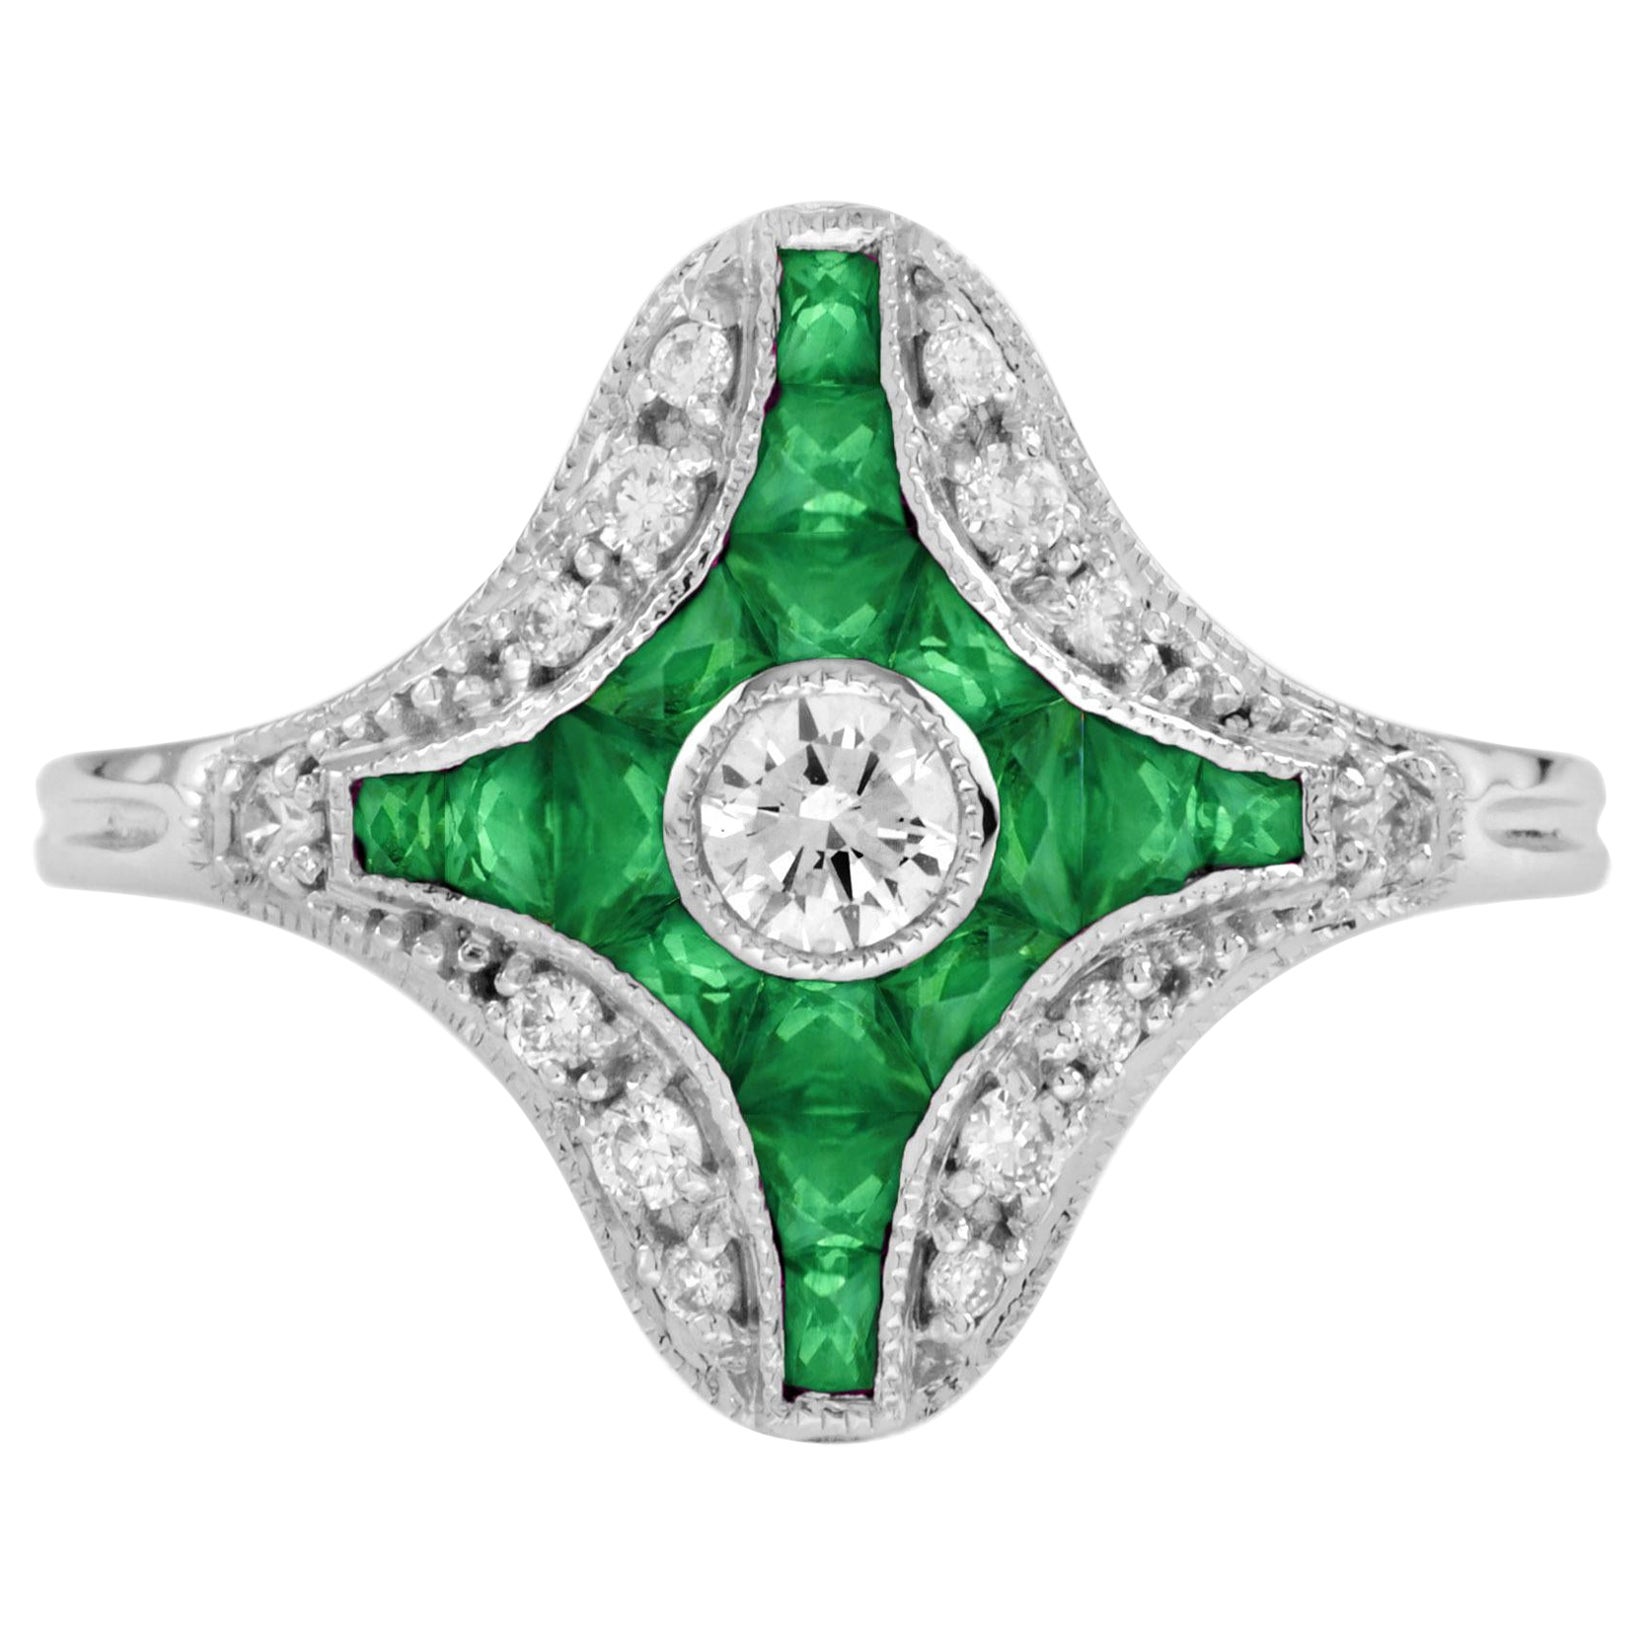 Diamond and Emerald Art Deco Style Ring in 14K white Gold